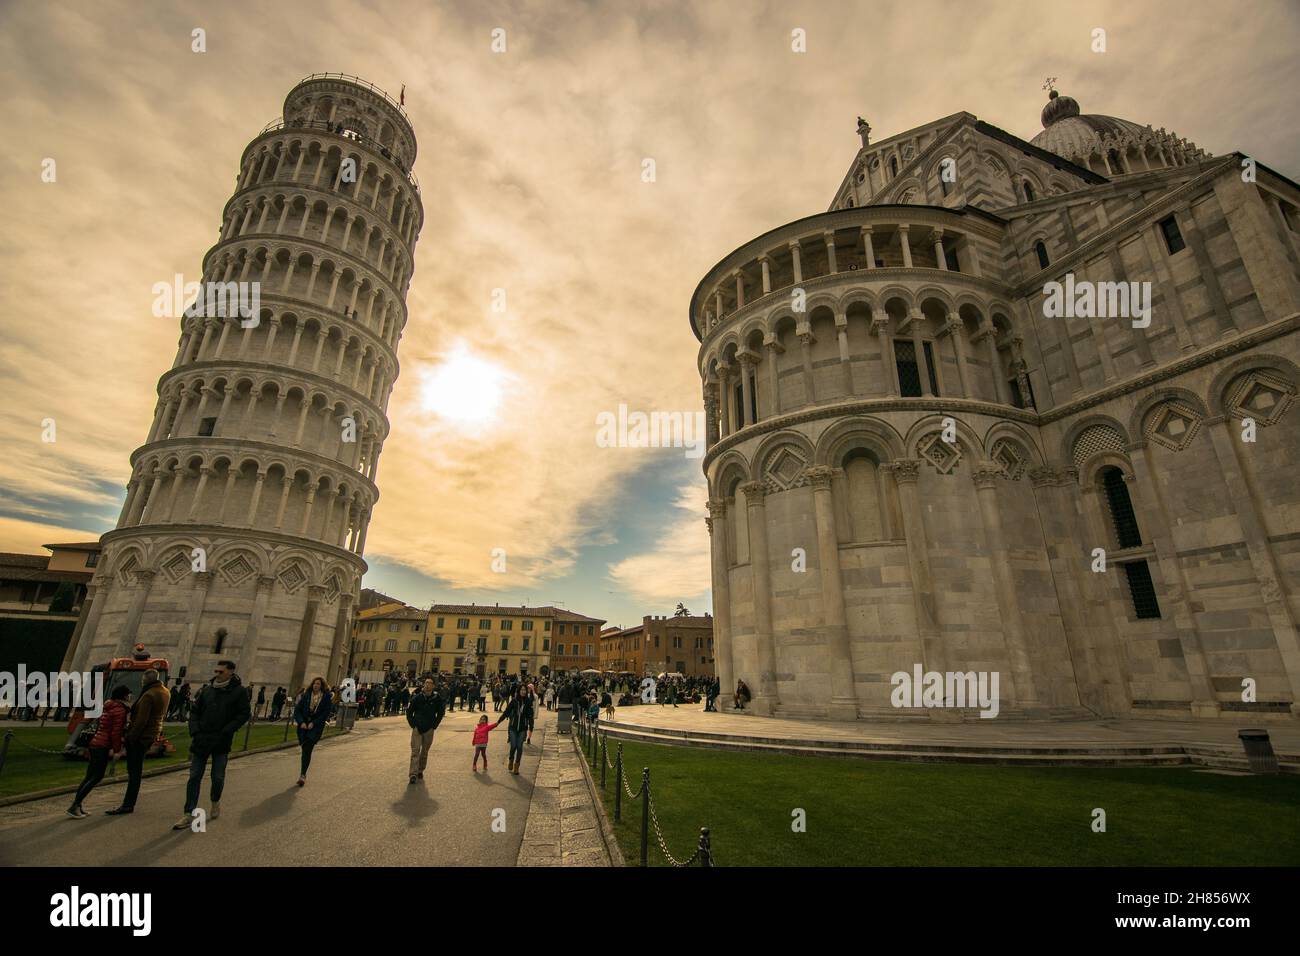 A beautiful day in Pisa, Italy. In the background many tourists enjoying the leaning tower. Campo dei Miracoli. Stock Photo